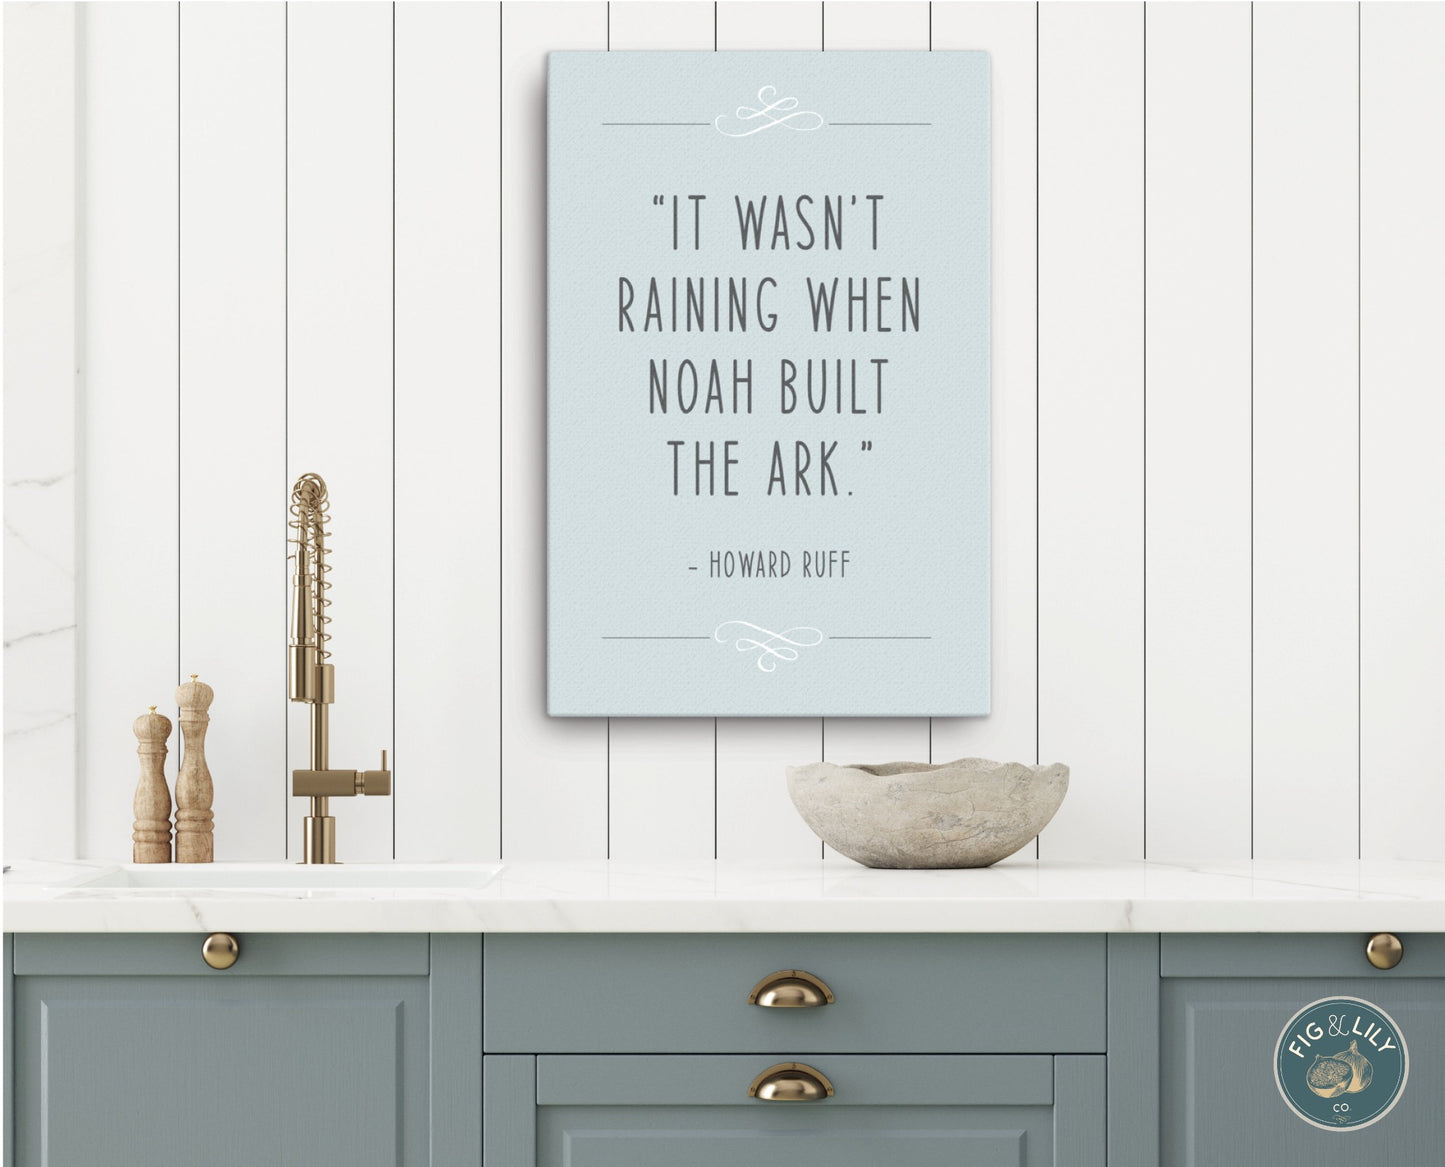 It wasn’t raining when Noah built the Ark Howard Ruff Quote dusty blue Christian aesthetic God provides prepare wall art decor canvas for home or financial insurance office